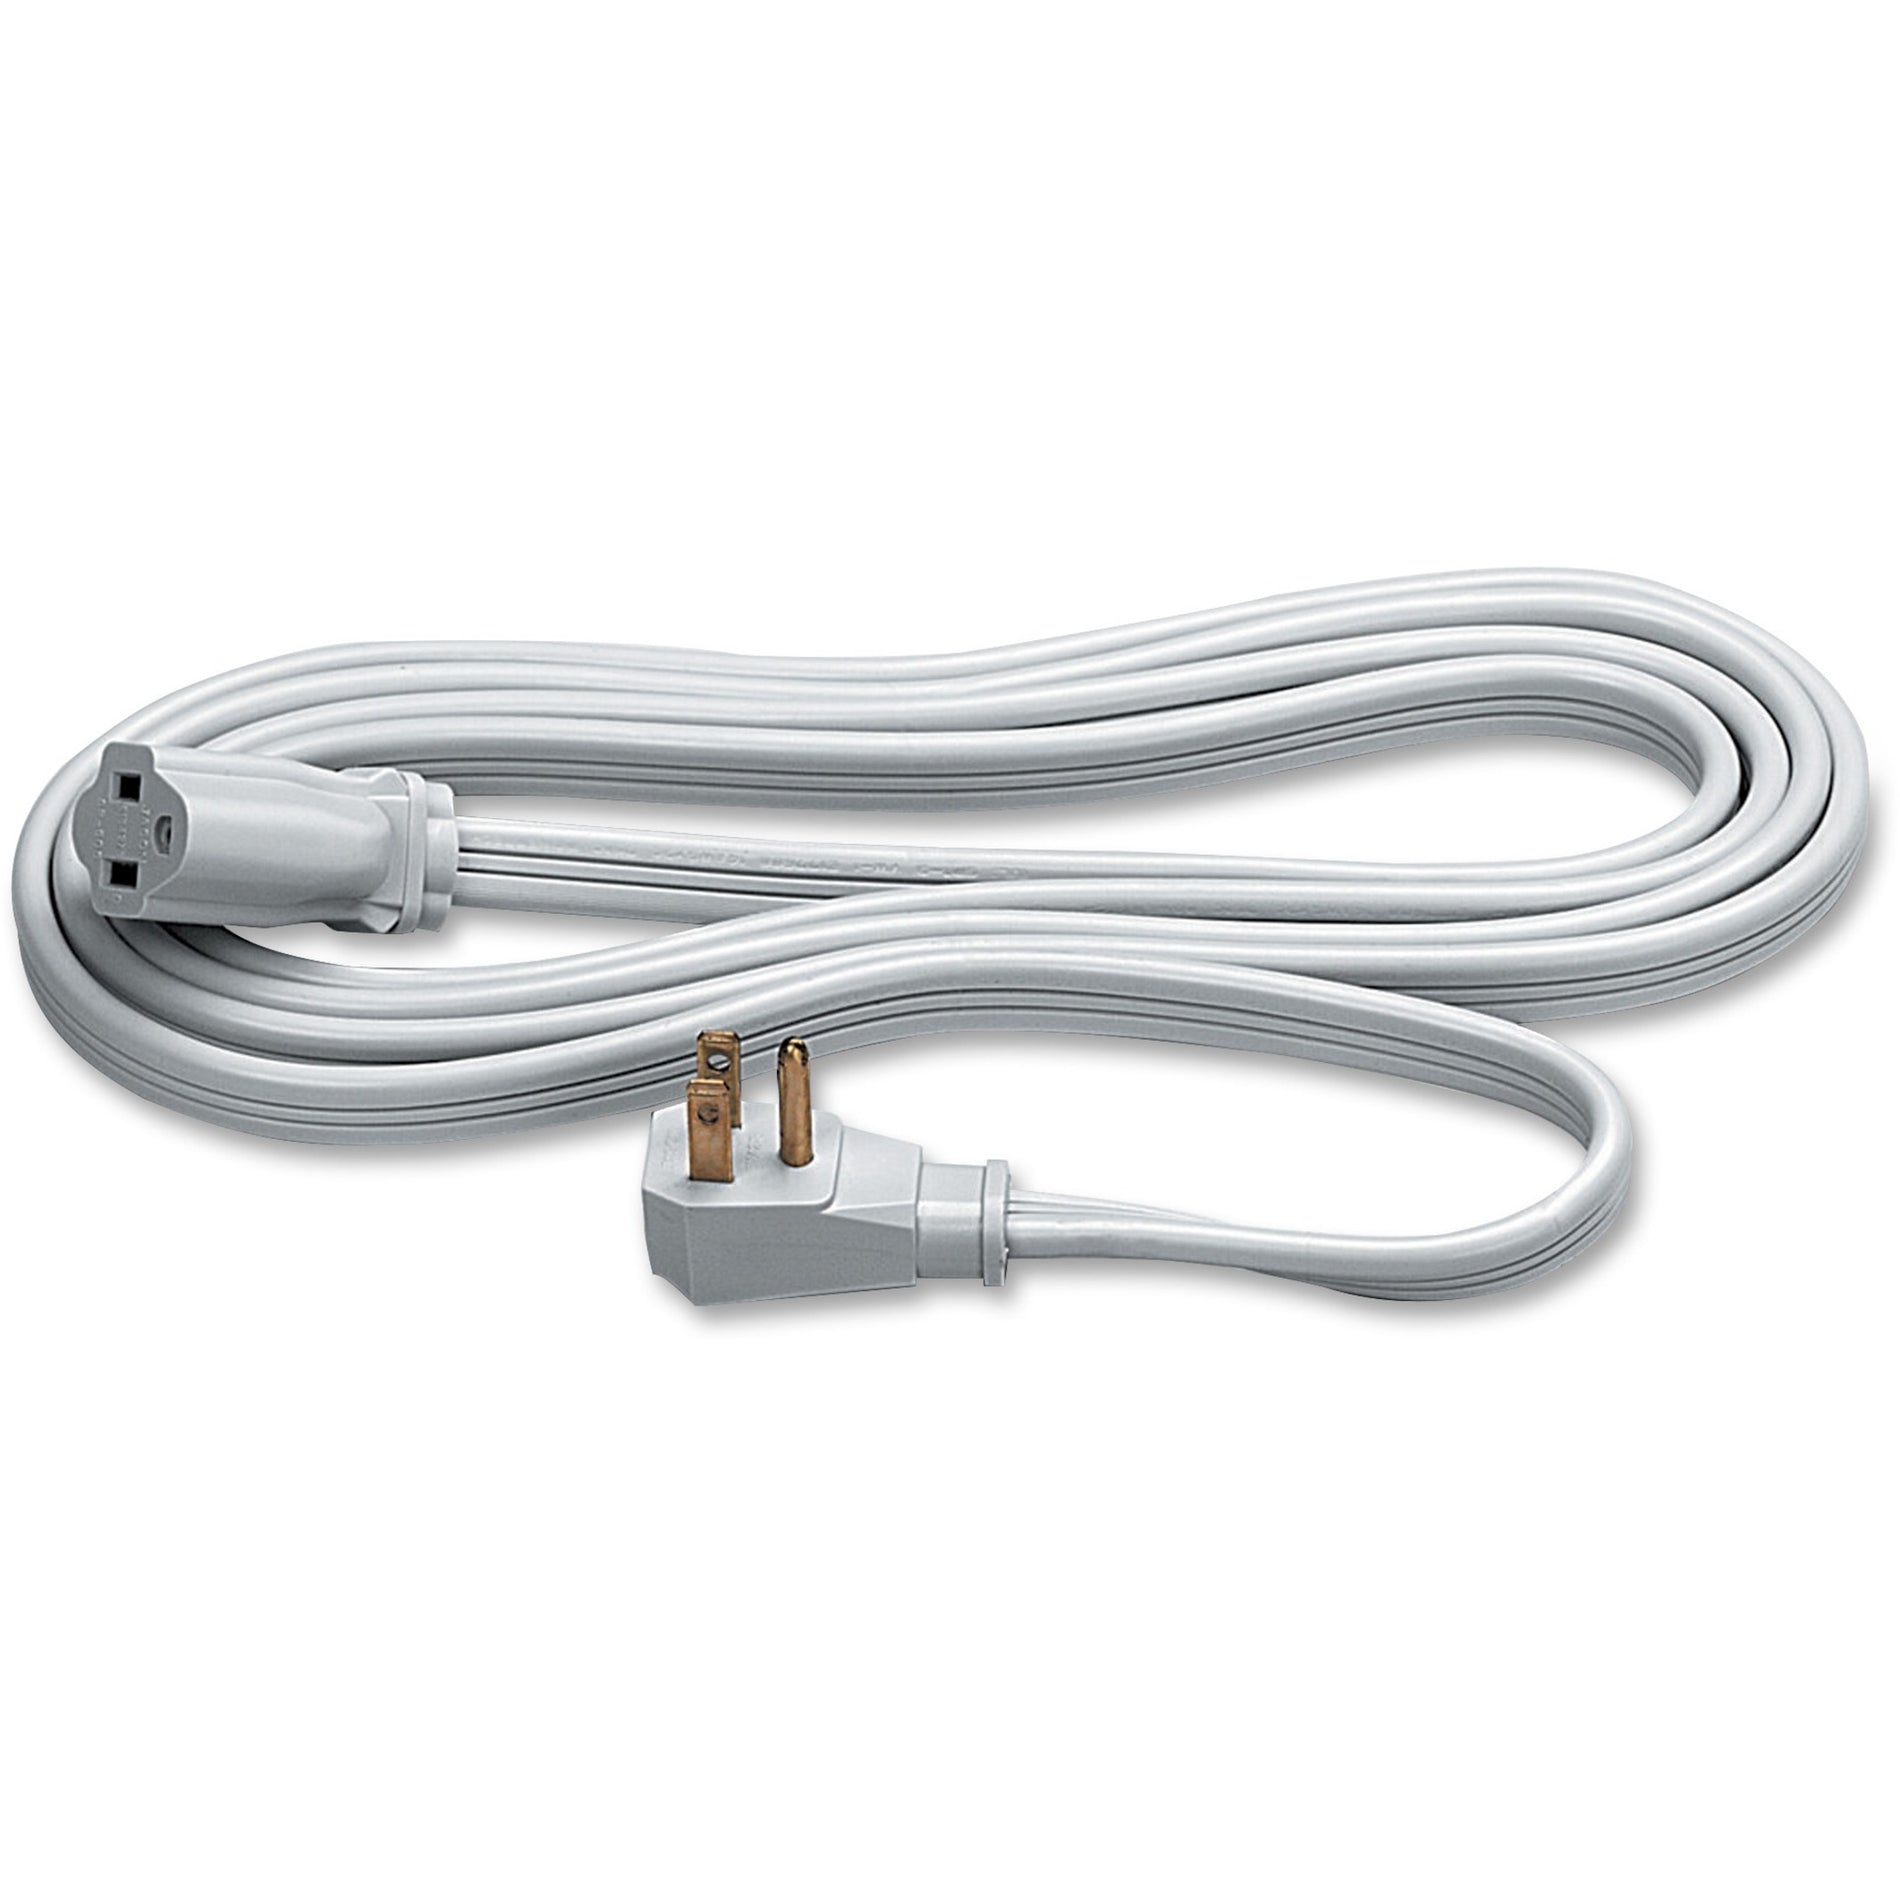 Fellowes 99595 Heavy-Duty Indoor 9' Extension Cord, 14 Gauge, 15 Amp, Gray